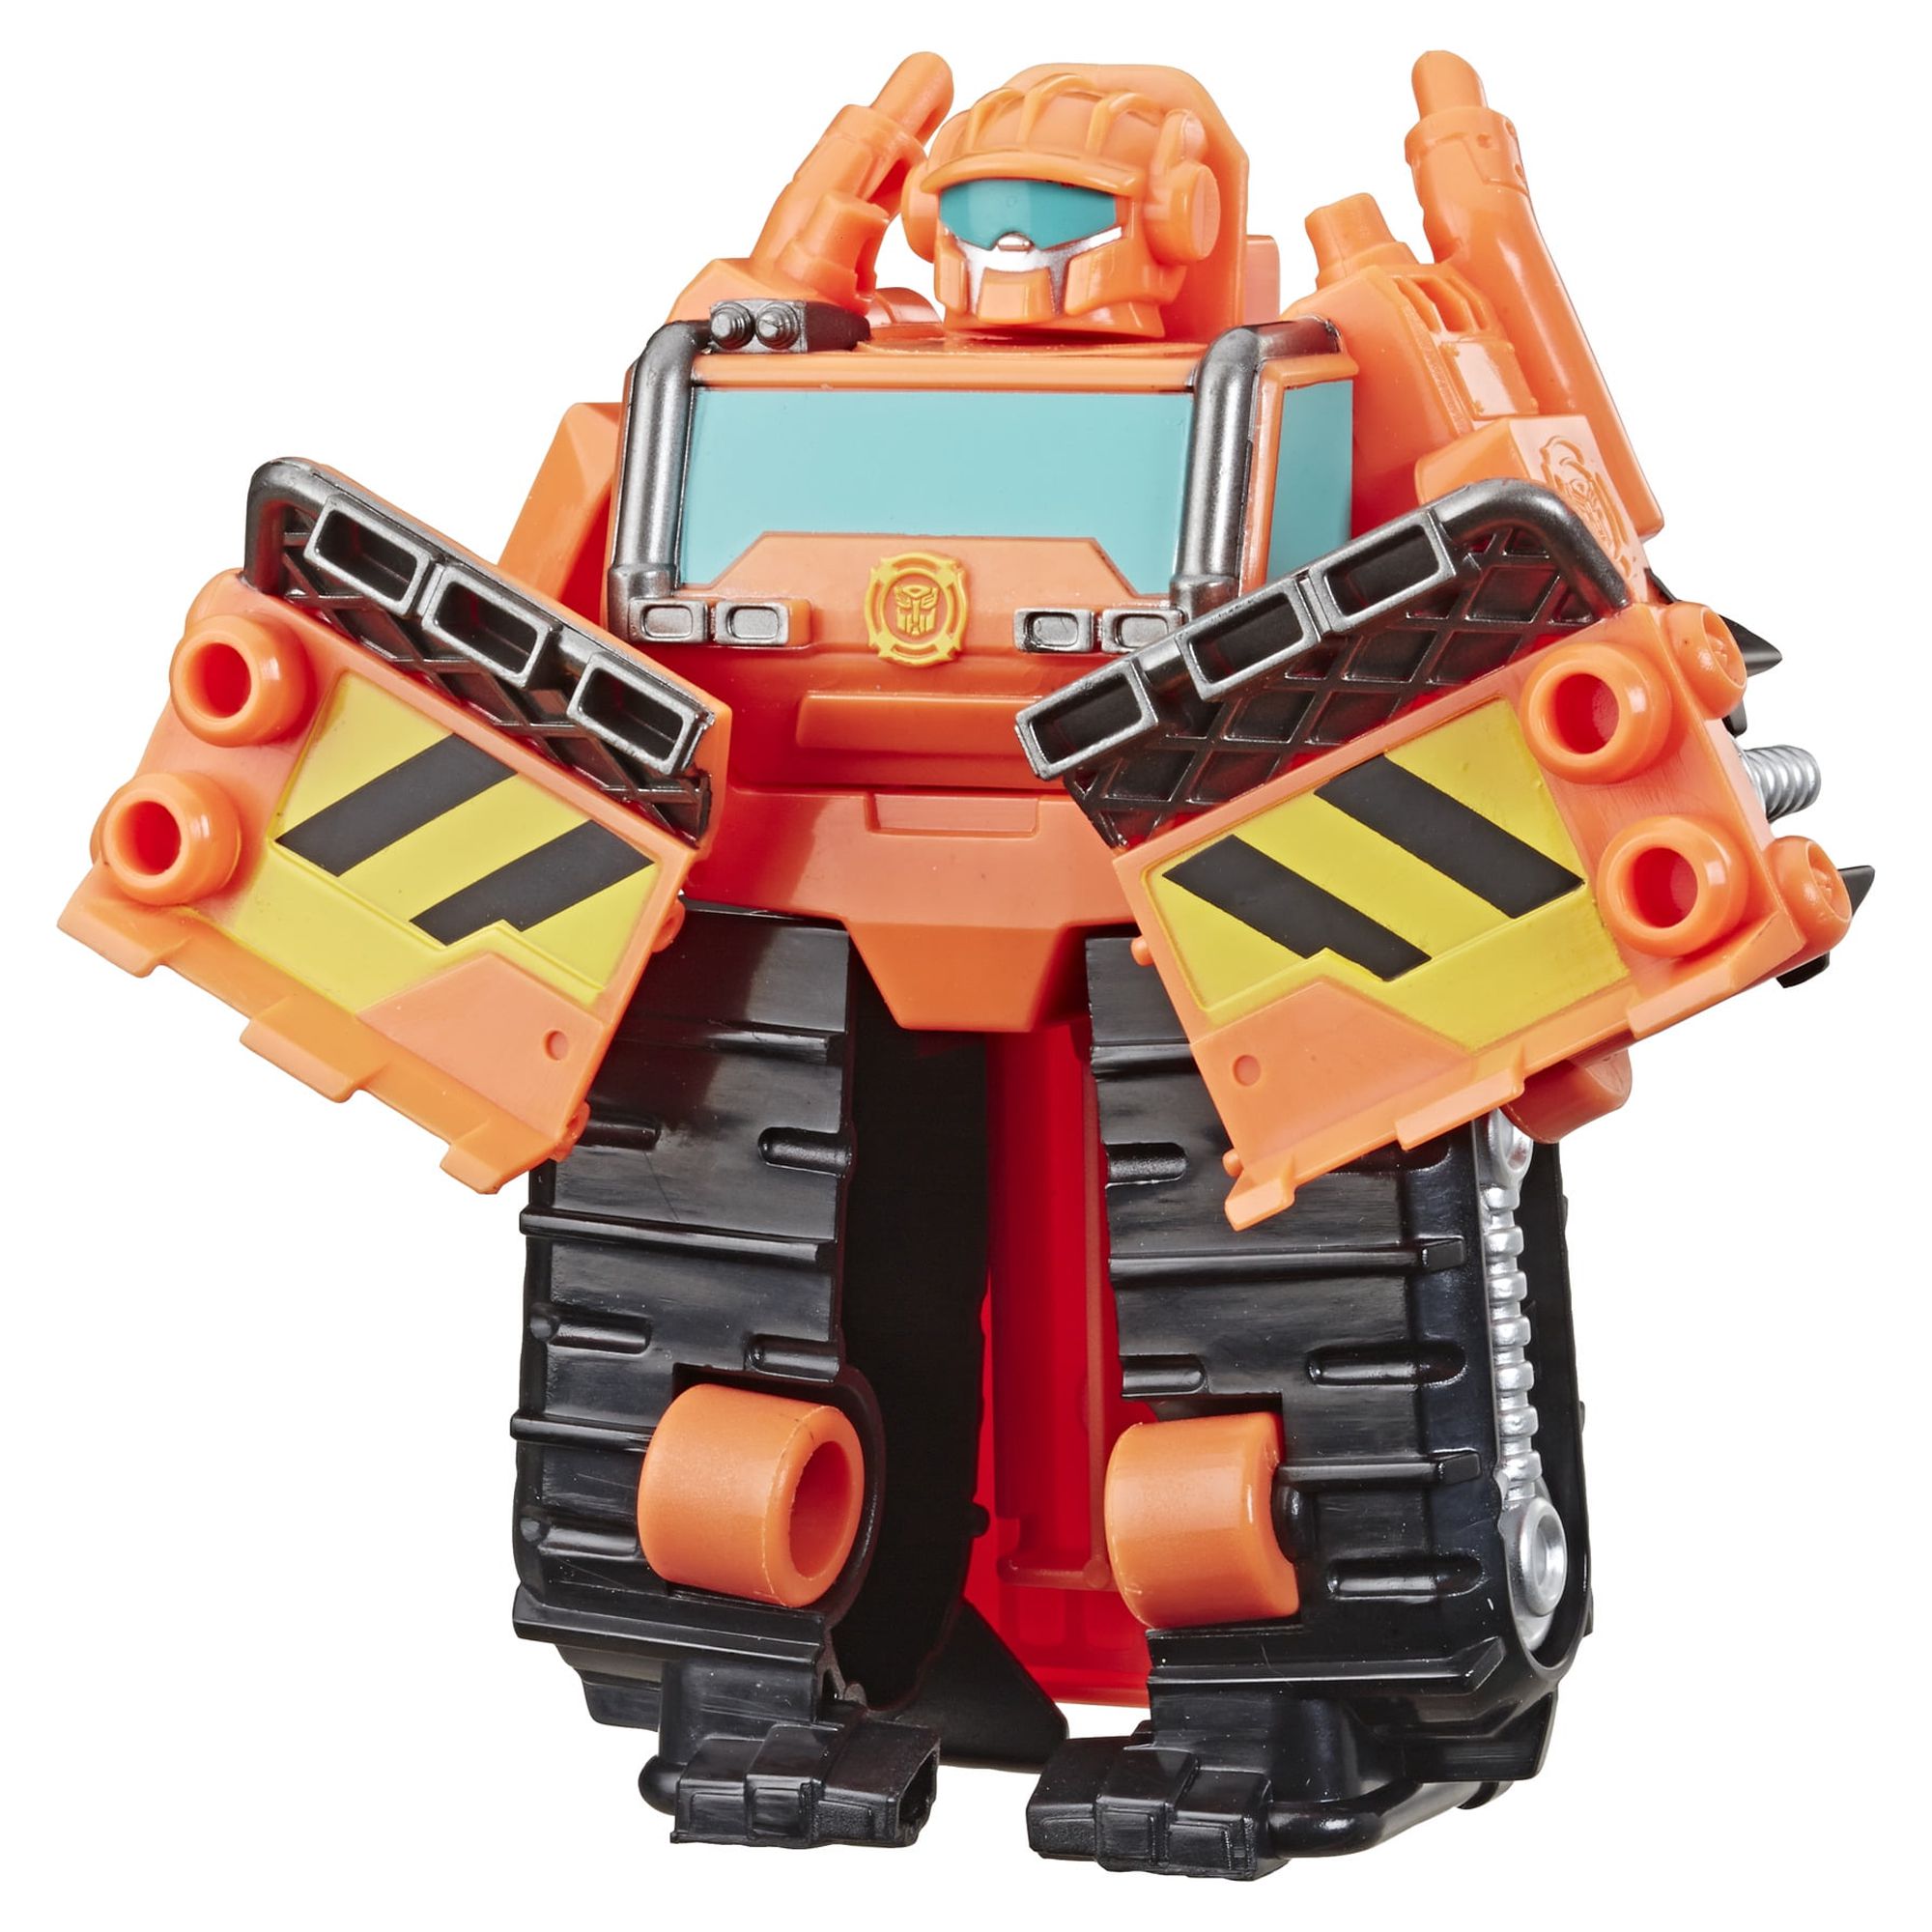 Playskool Transformers Rescue Bots Academy Wedge the Construction-Bot Action Figure - image 1 of 8